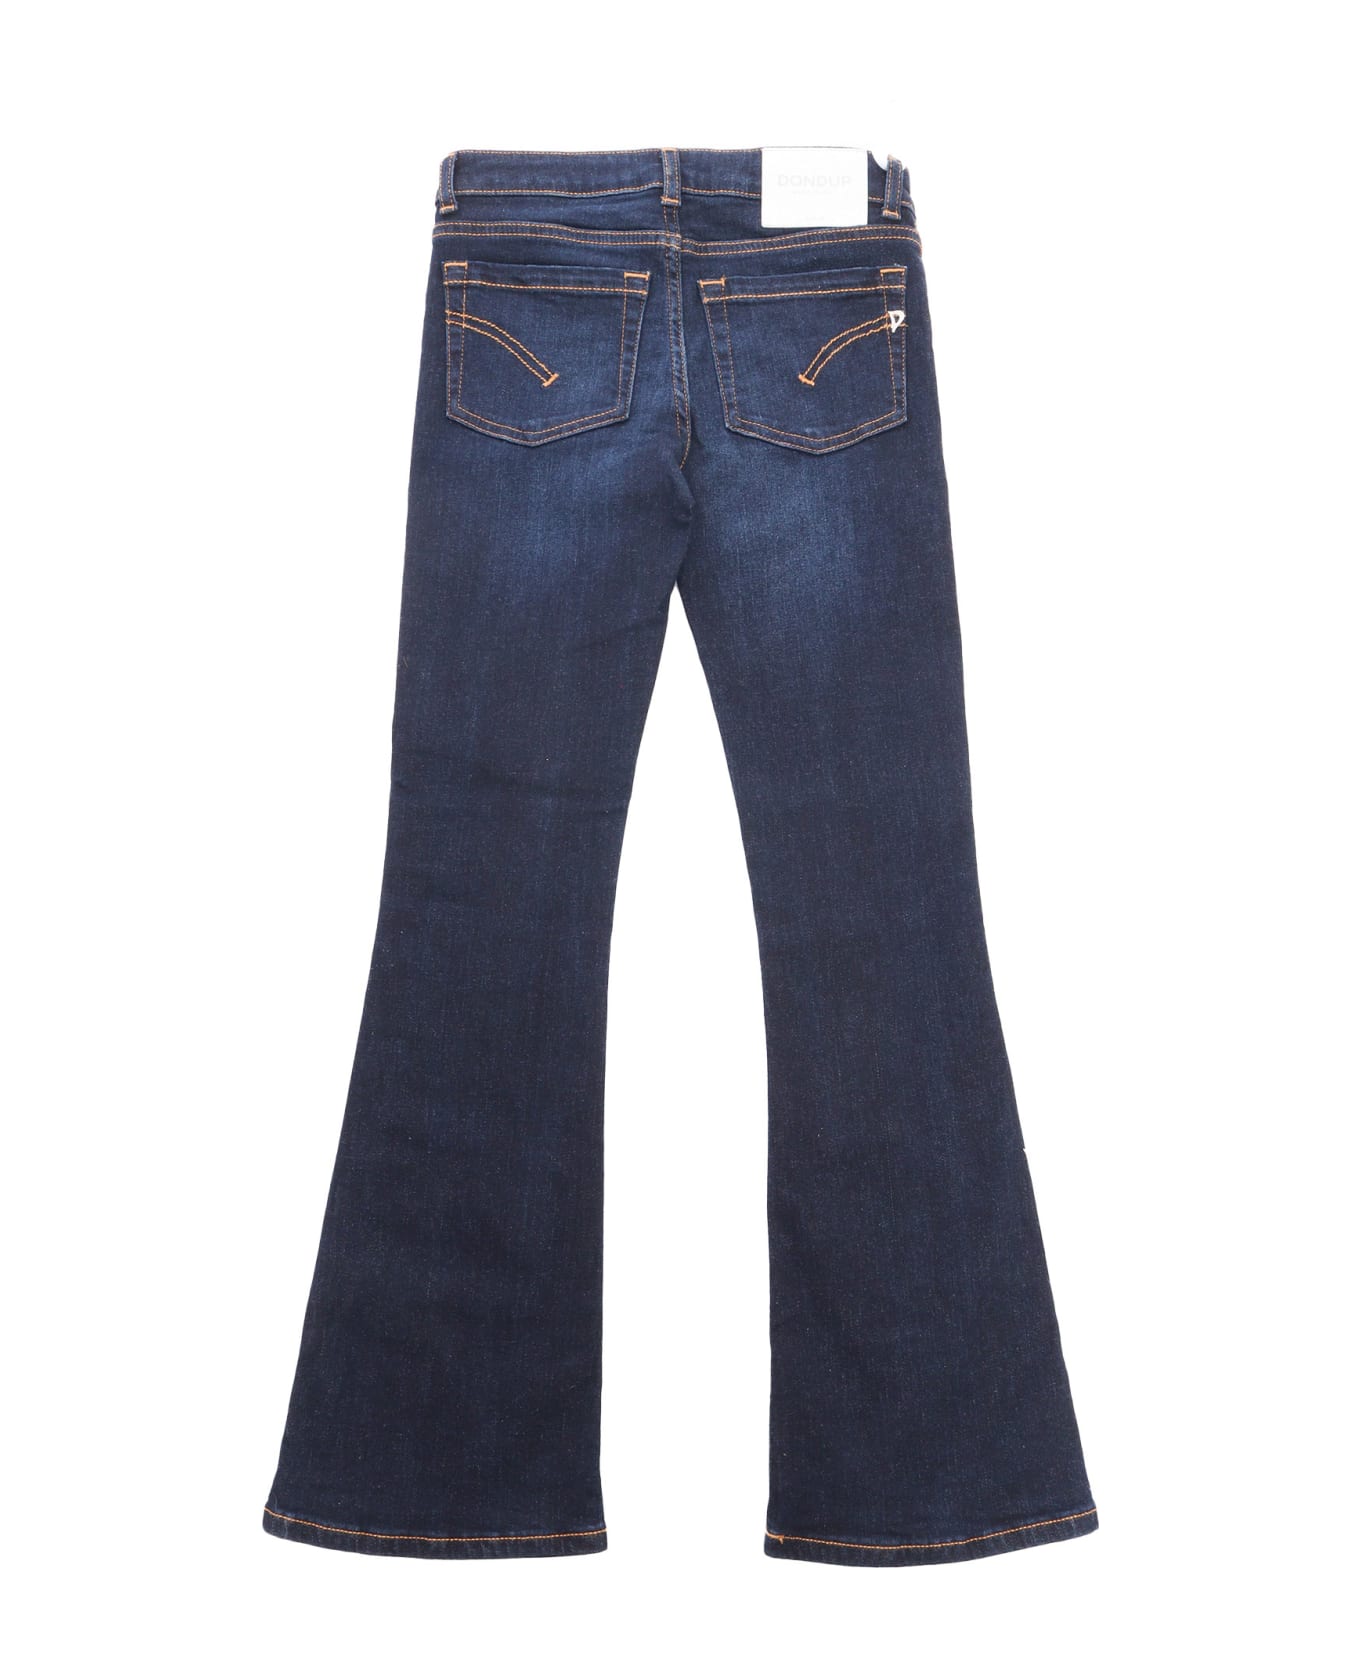 Dondup Janet Jeans - BLUE ボトムス